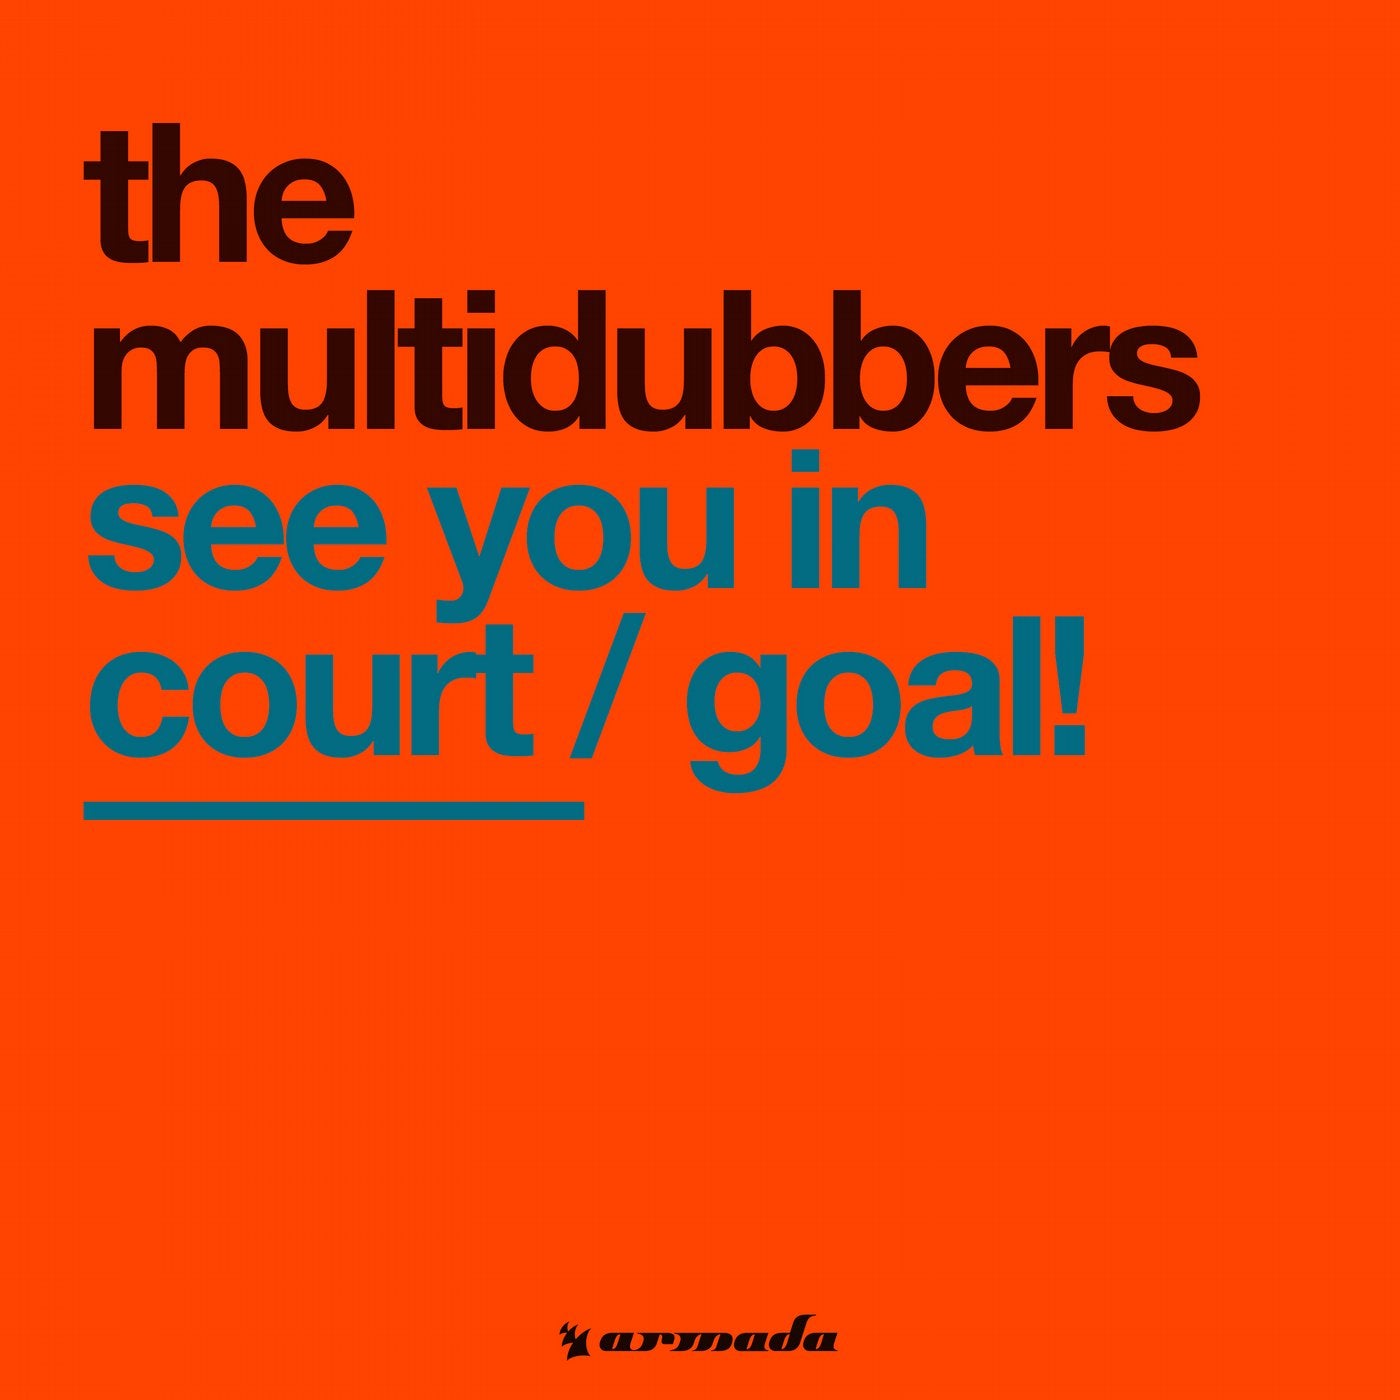 See You In Court / Goal!